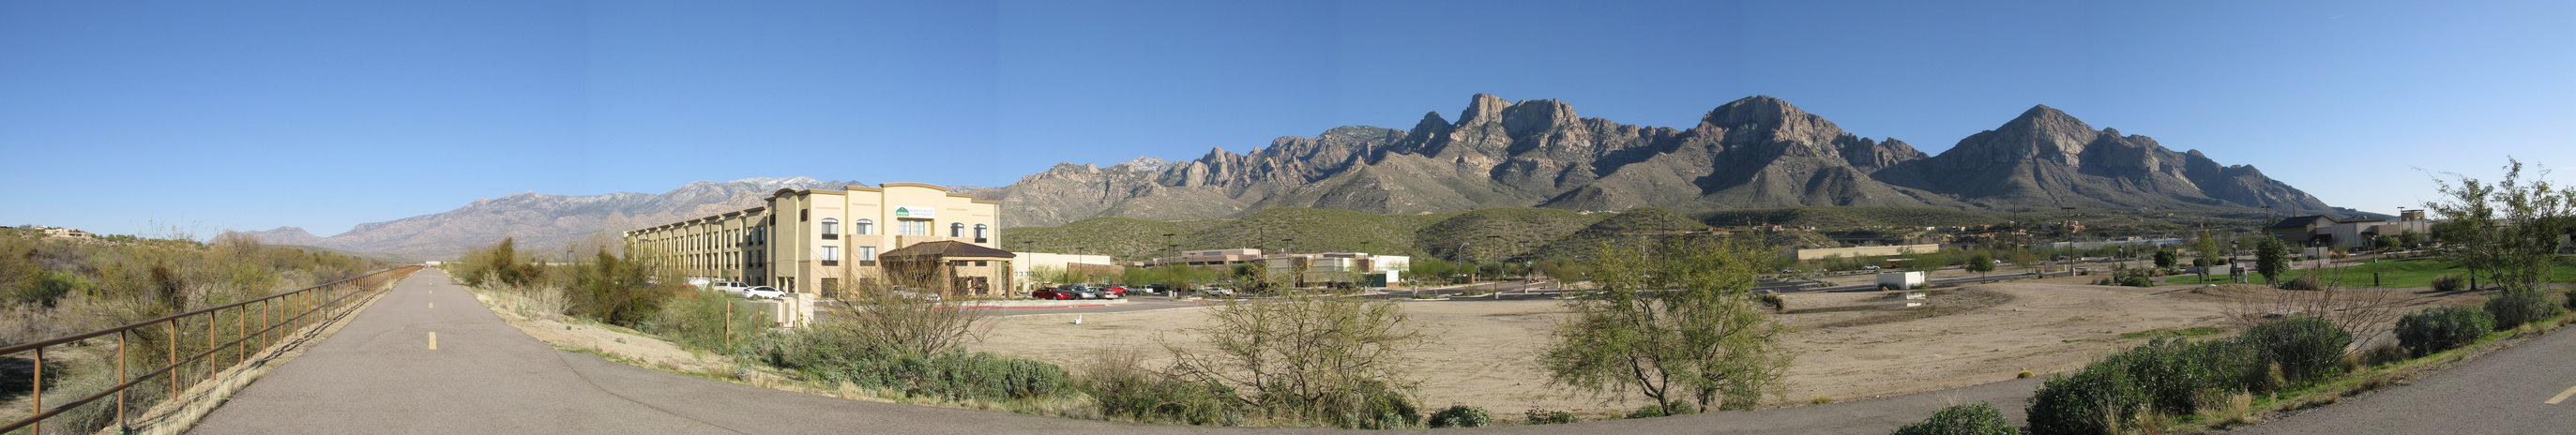 Oro Valley, AZ: Panorama shot of the Catalina Mountains from Oracle Road